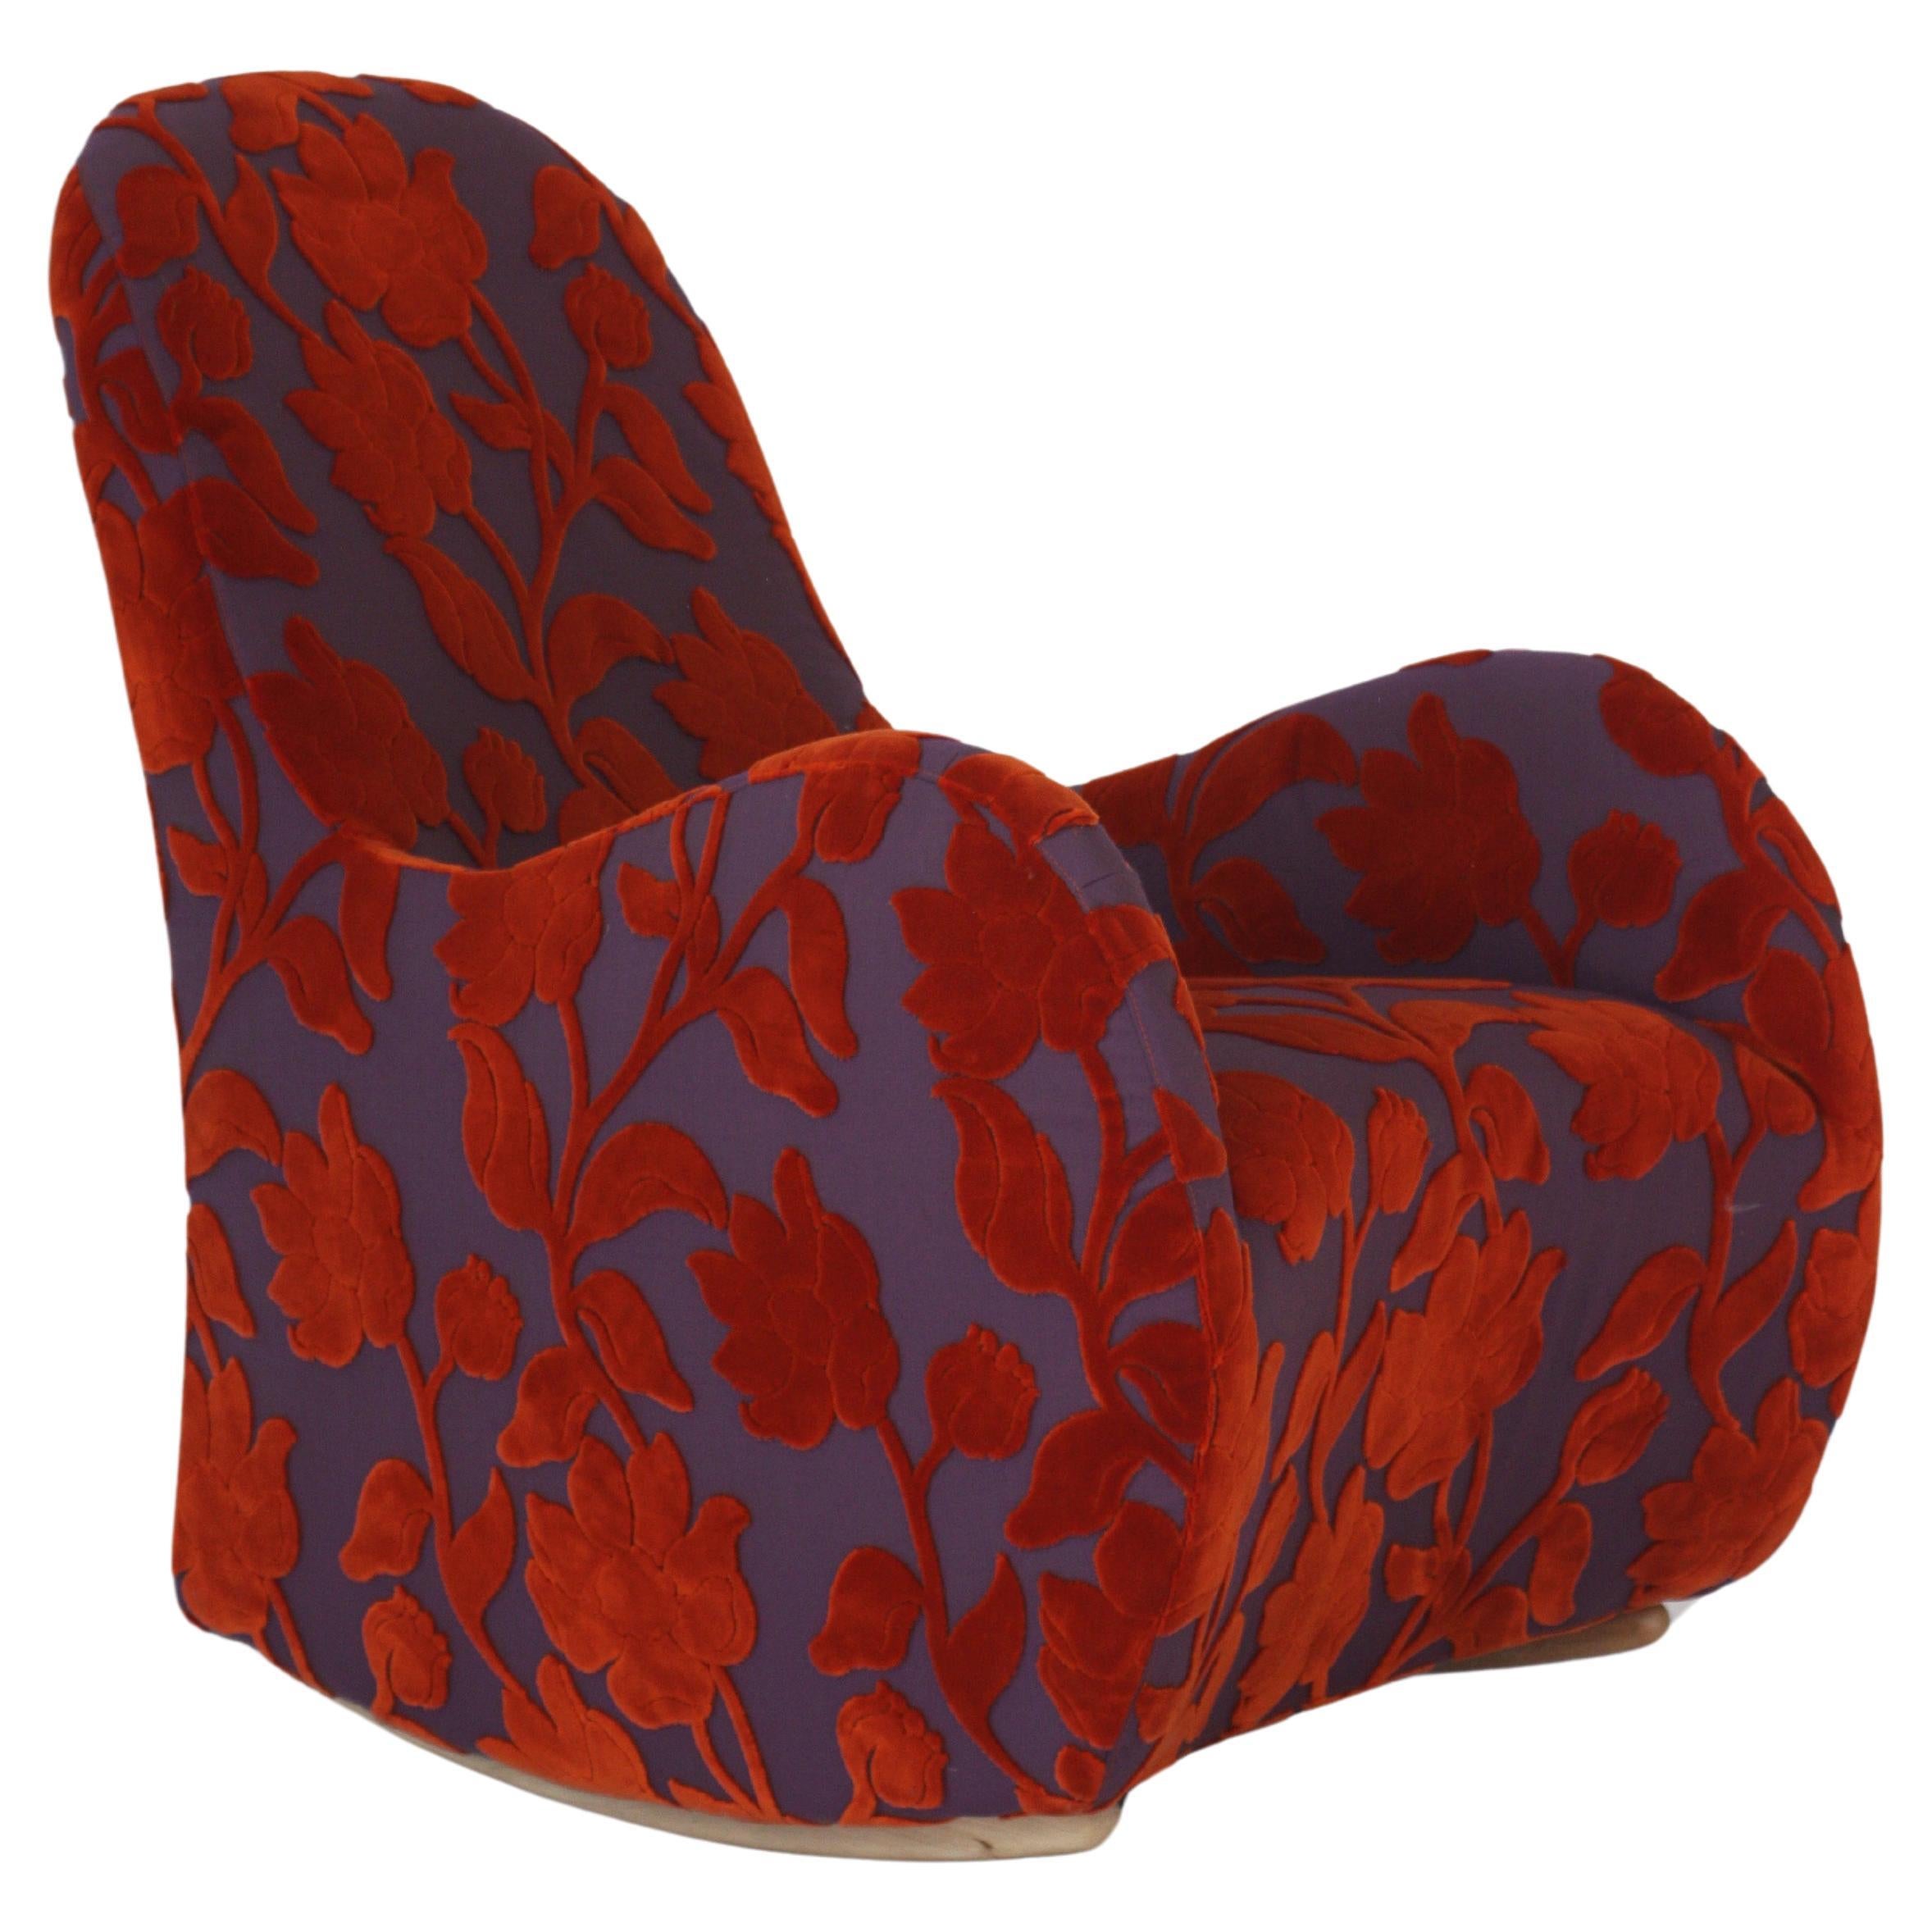 Giovannetti, Gongolo, NEW Rocking armchair, red fantasy, modern style